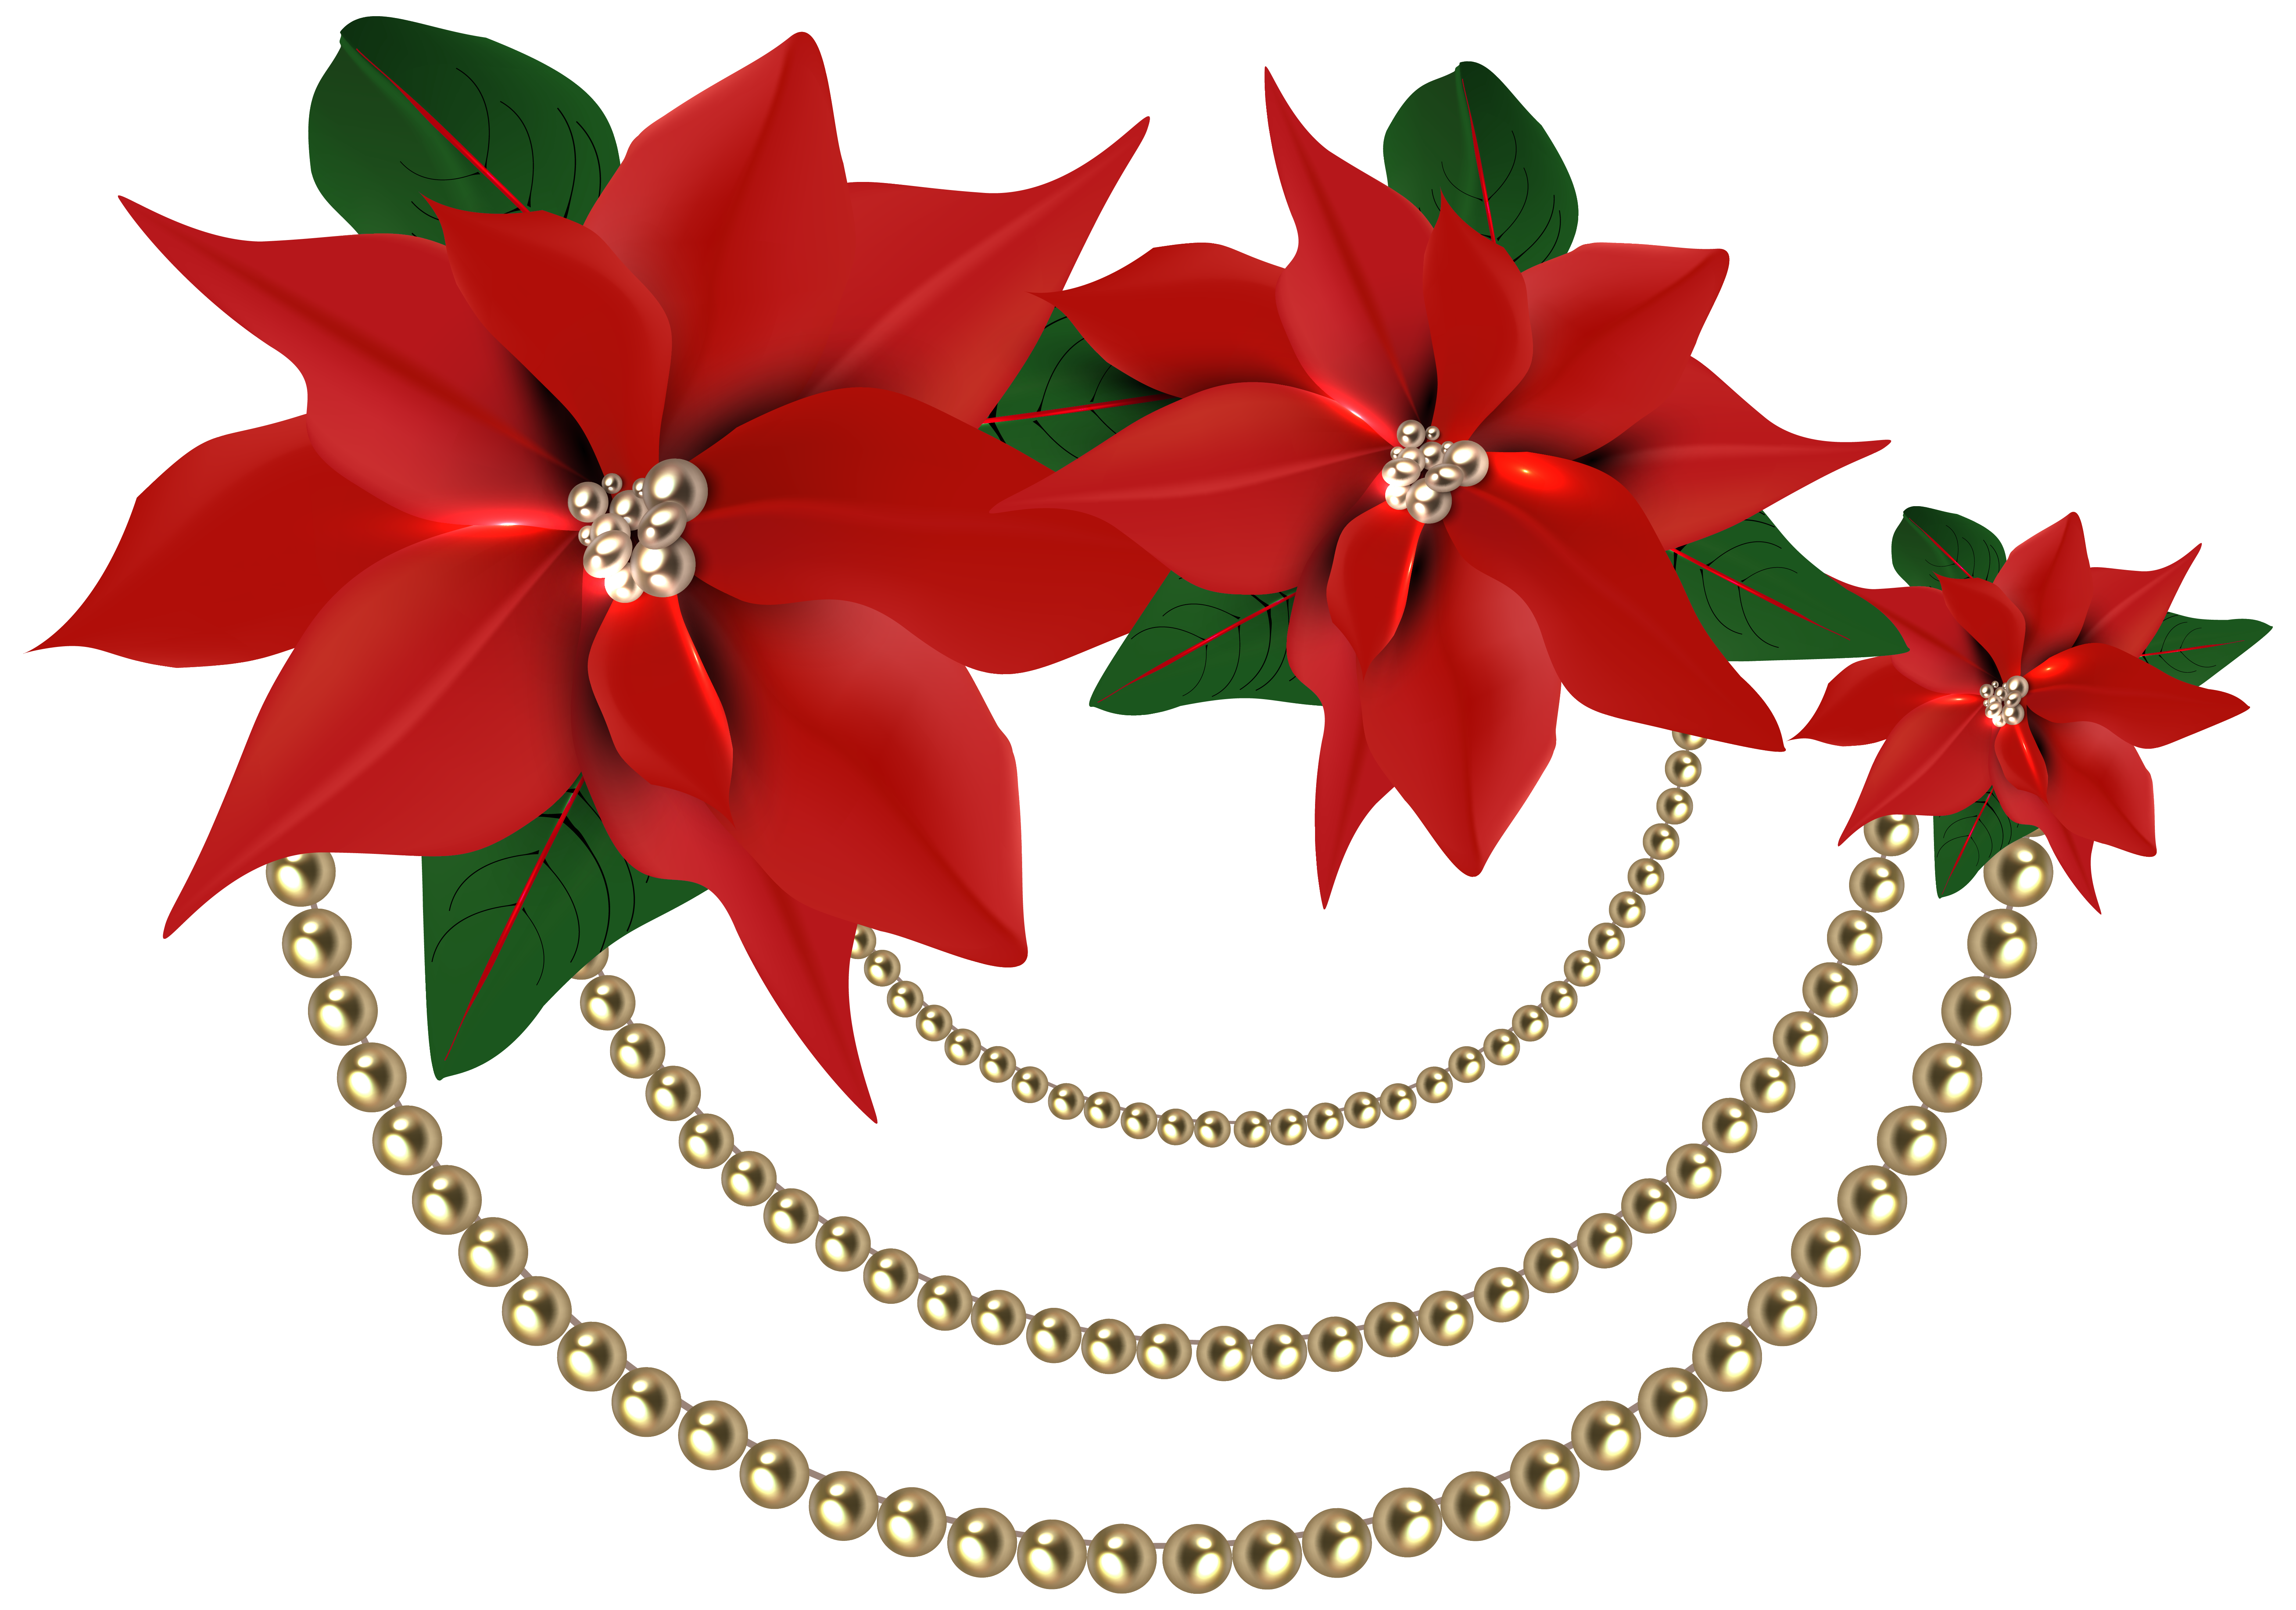 Poinsettias clipart poinsetta. Decorative christmas with pearls